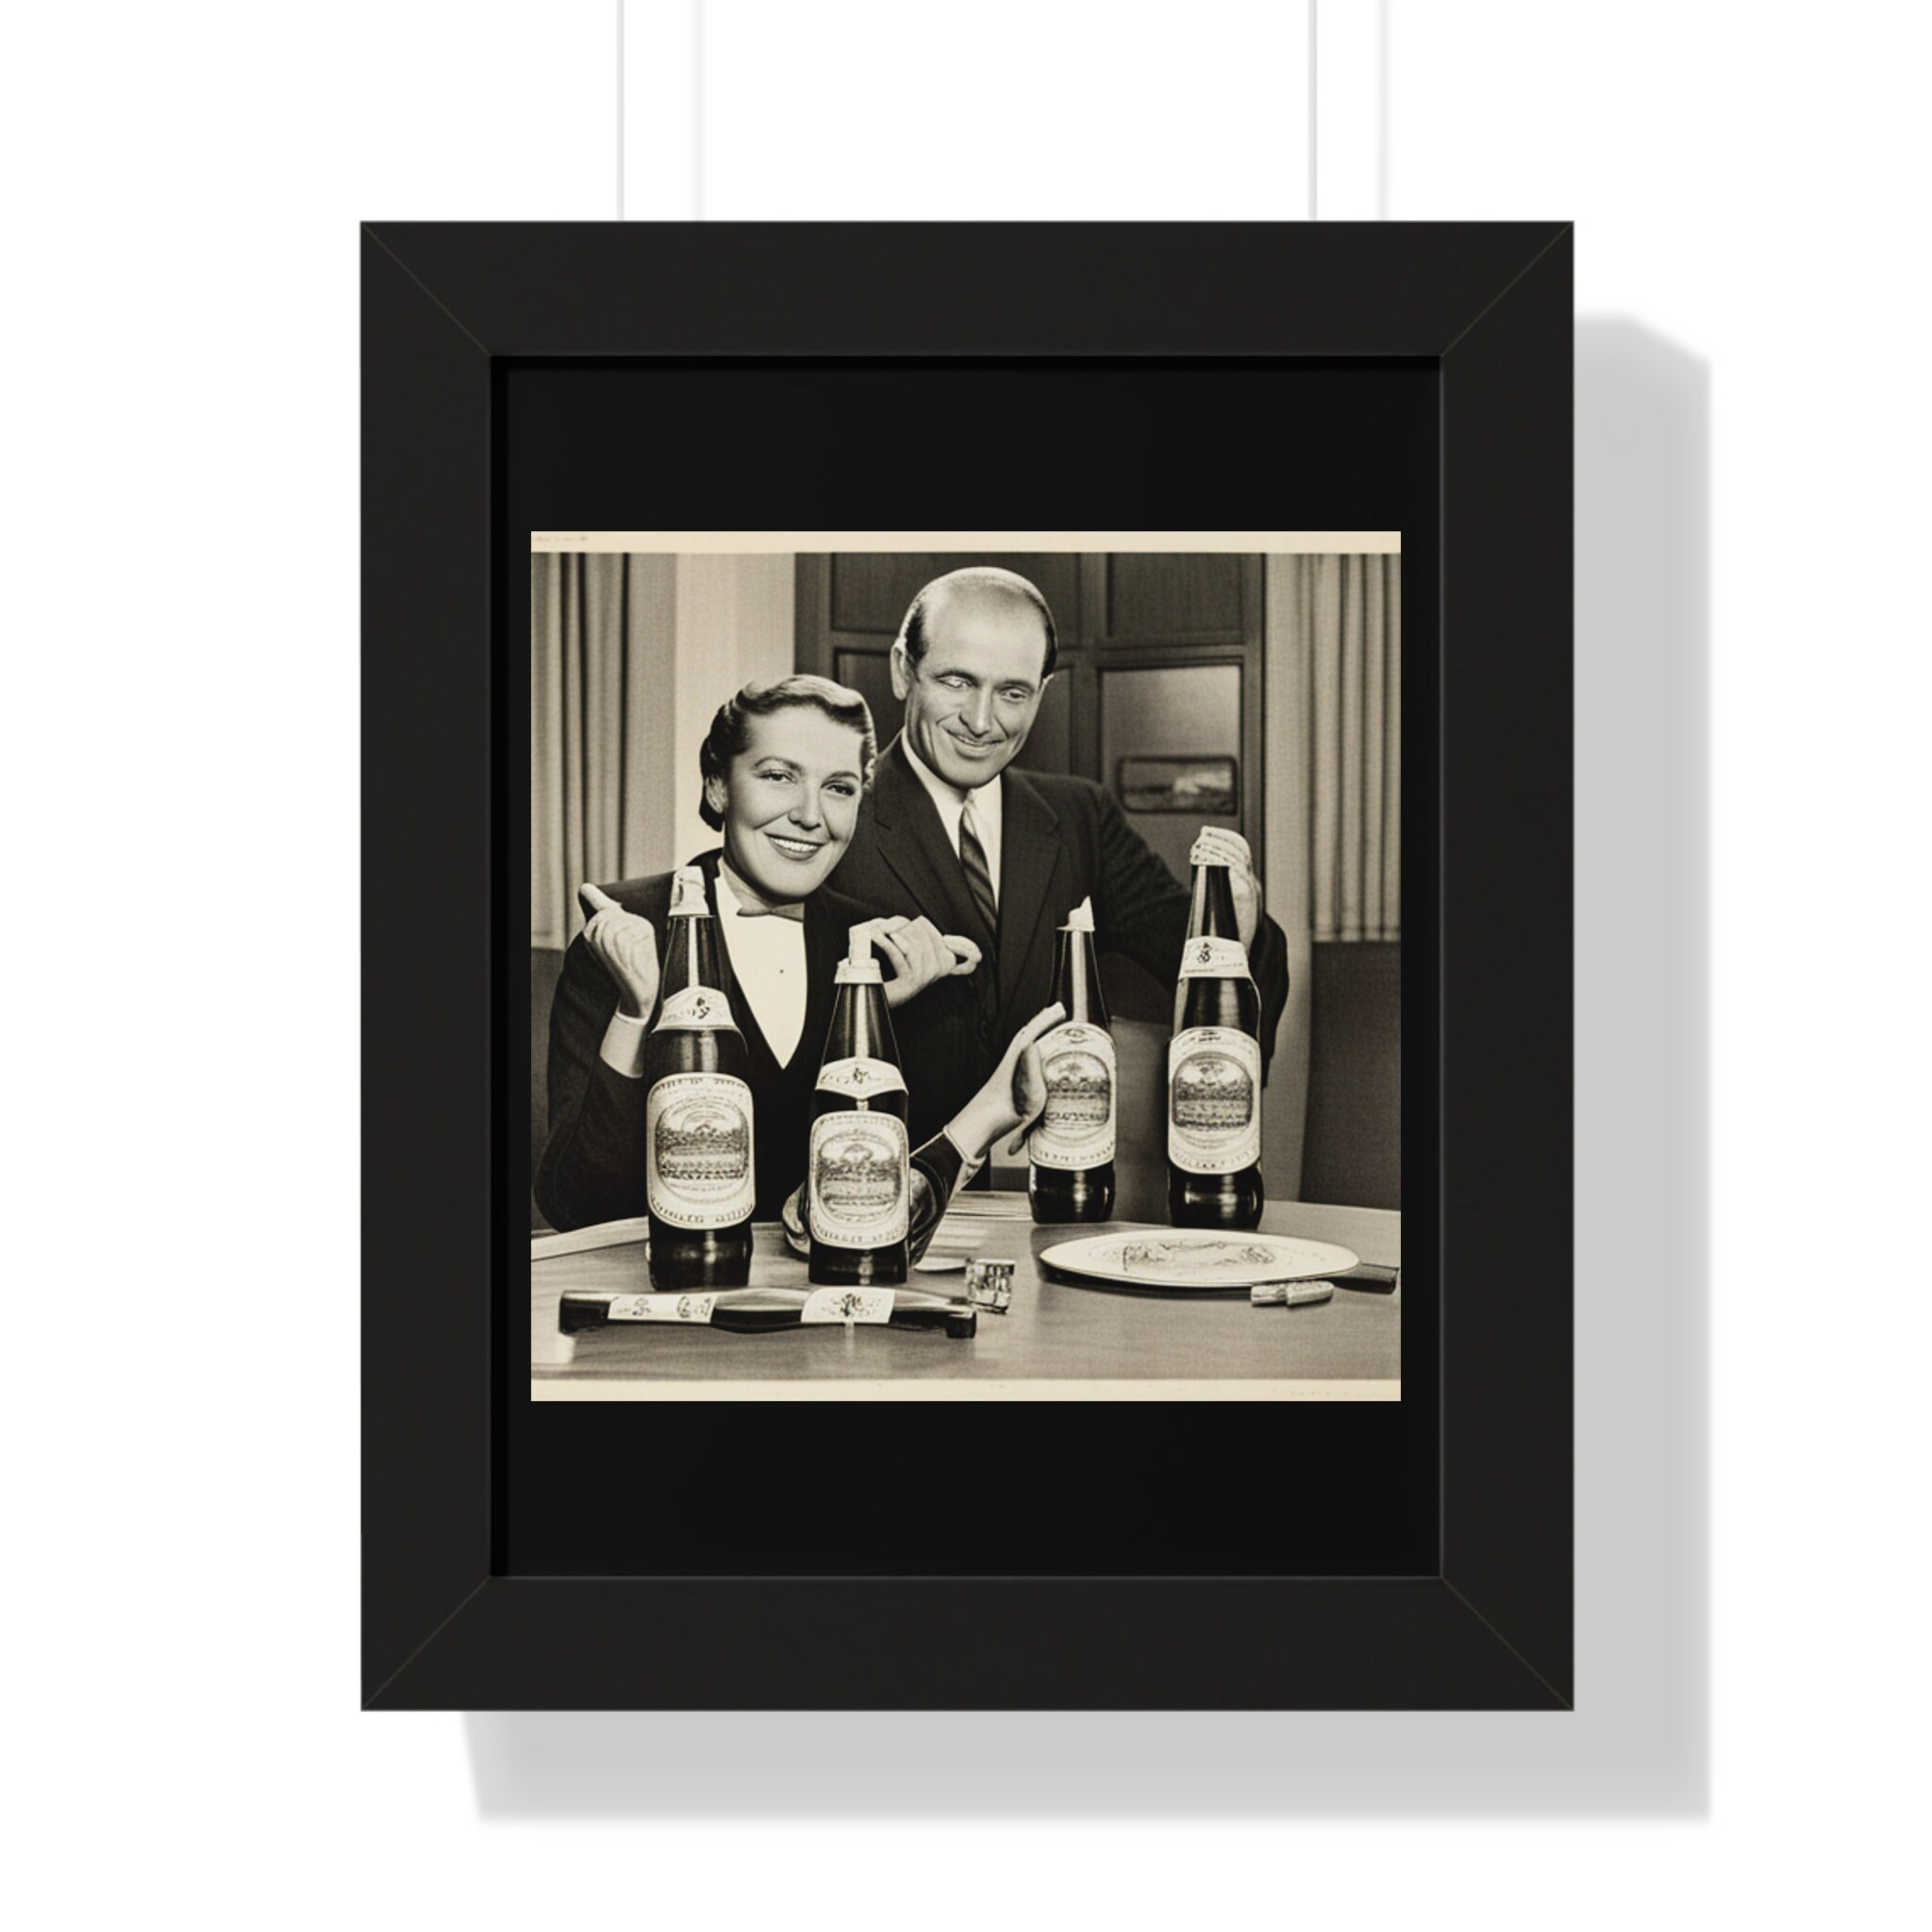 Prohibition - Photo - Bust - 1920s - Bar Decor - Pub Art - Beer Gift - Home  Brewery - Brewery Decor - Bootlegging - Speakeasy